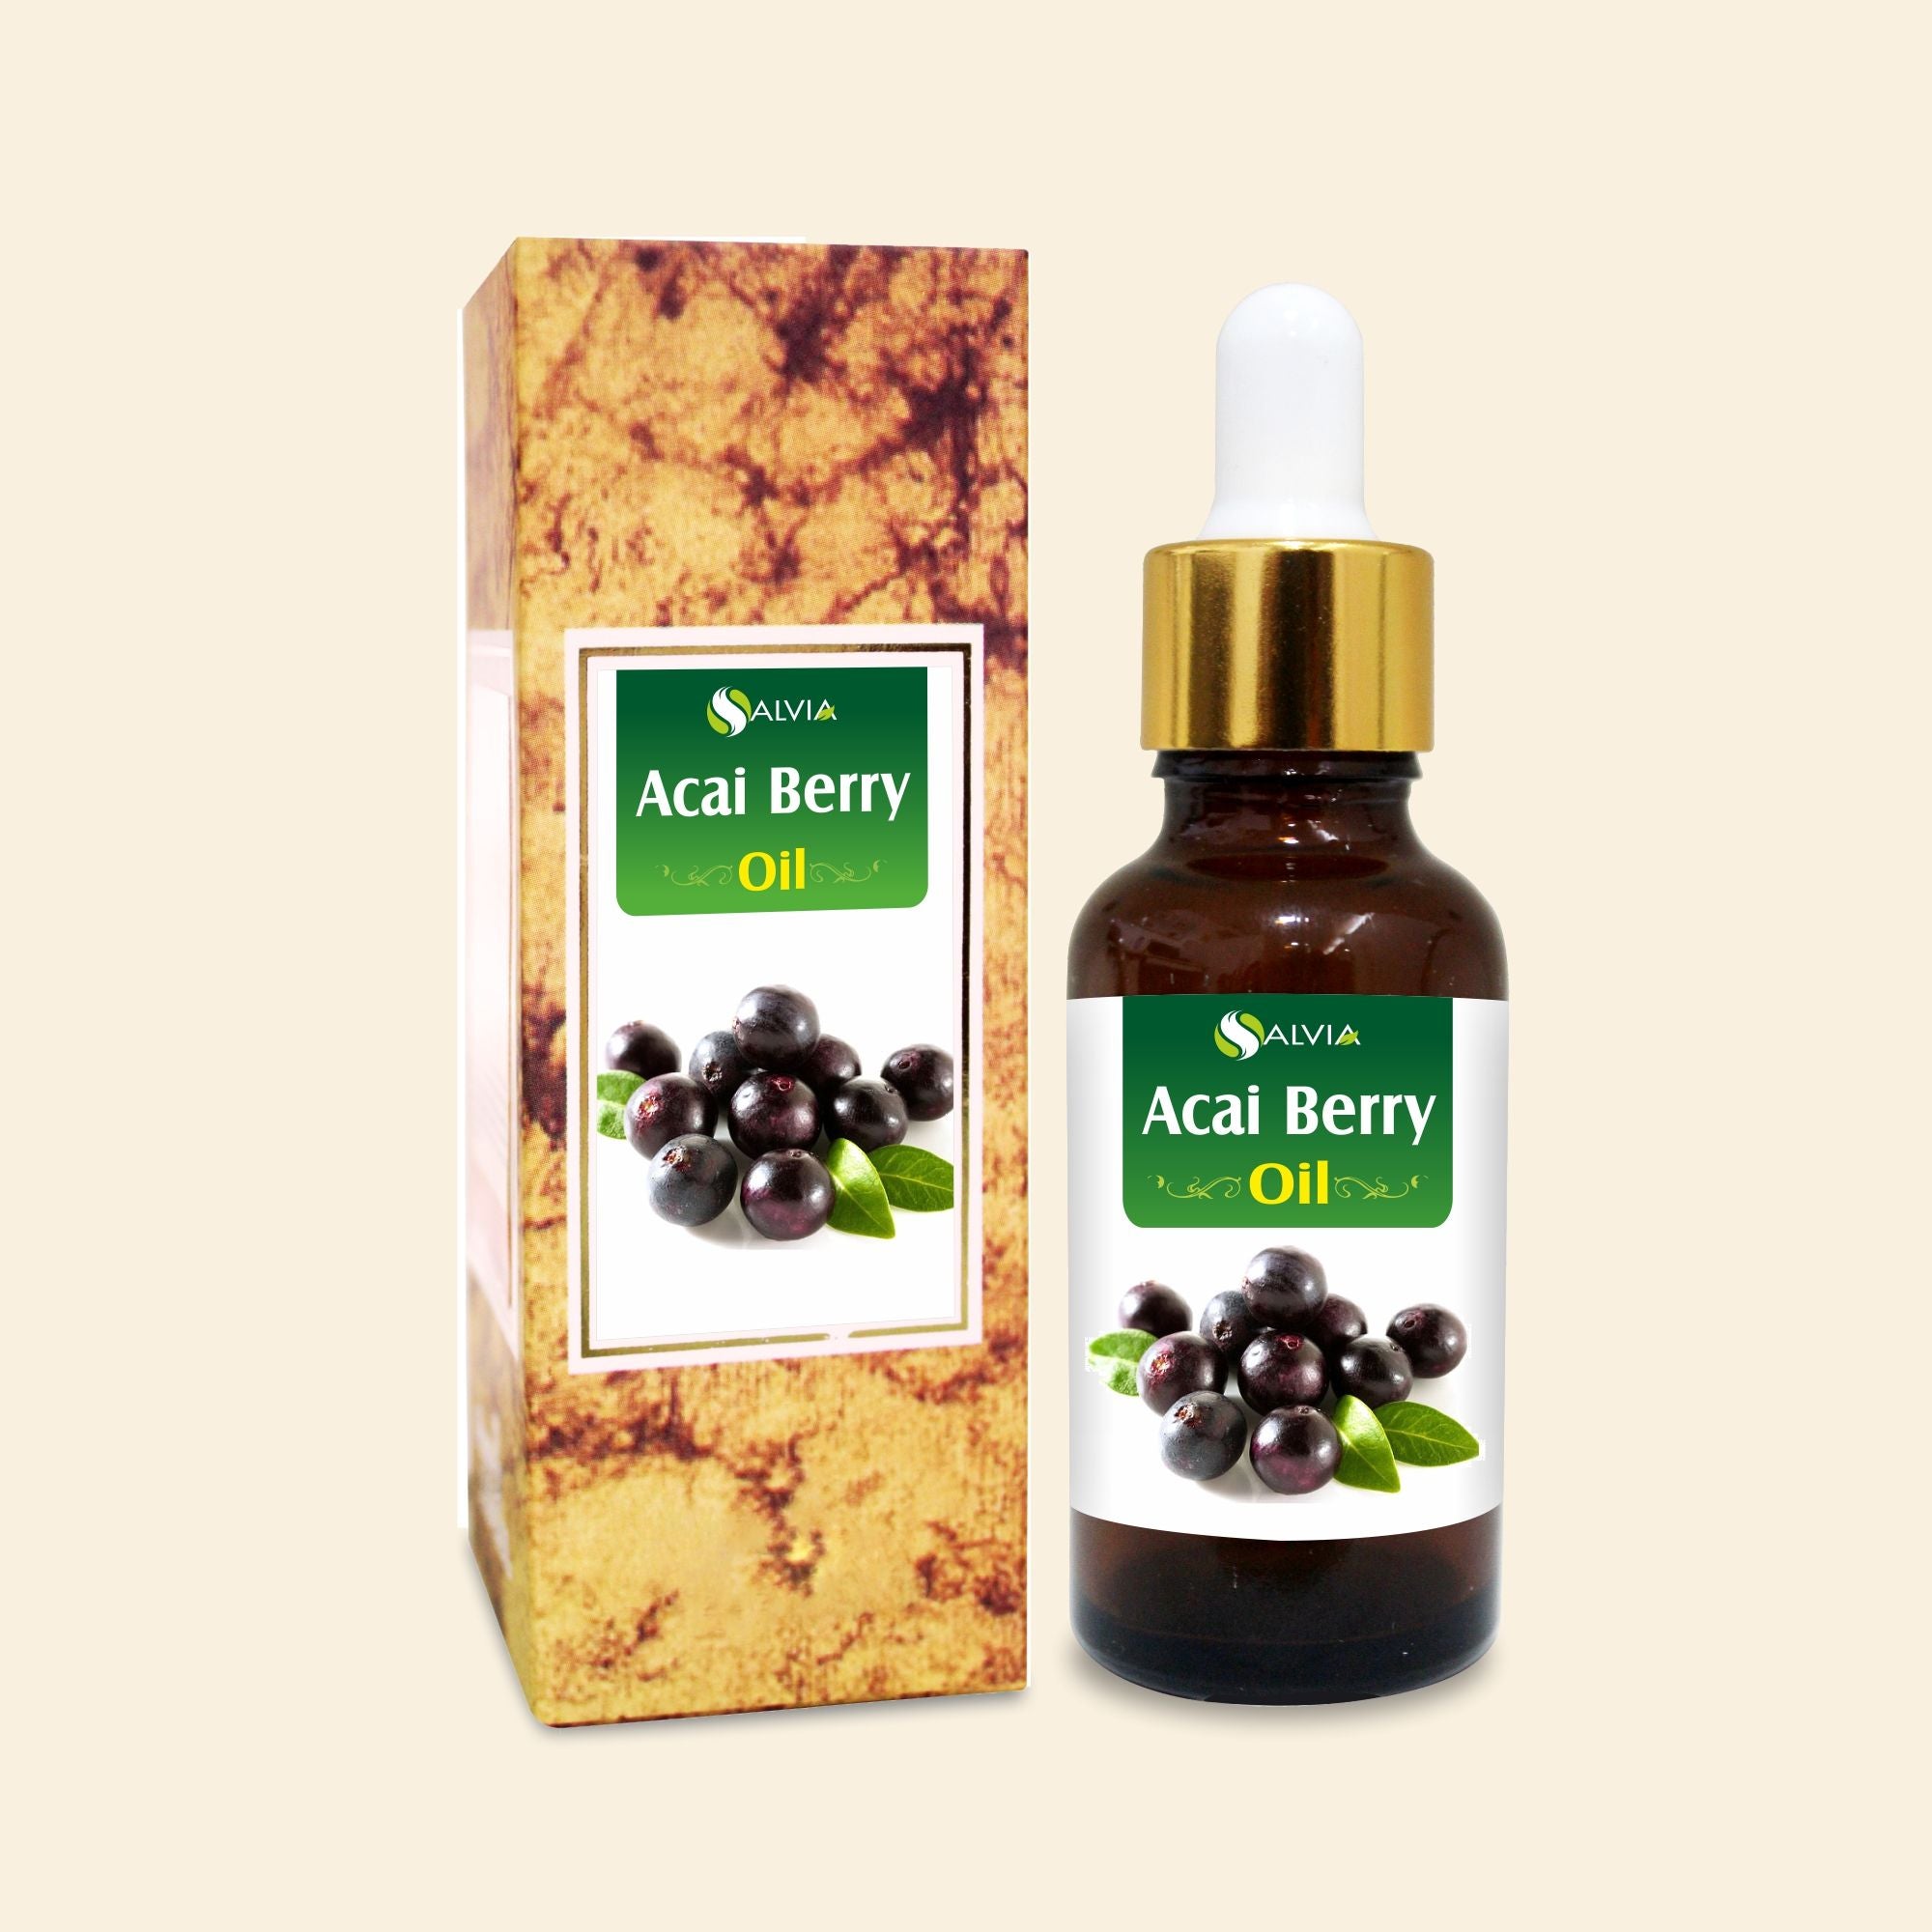 Salvia Best Products Carrier Oils, Essential Oils for Aromatherapy, Natural Carrier Oils, Products, Salvia Acai Berry Oil 100% Natural Pure Carrier Oil